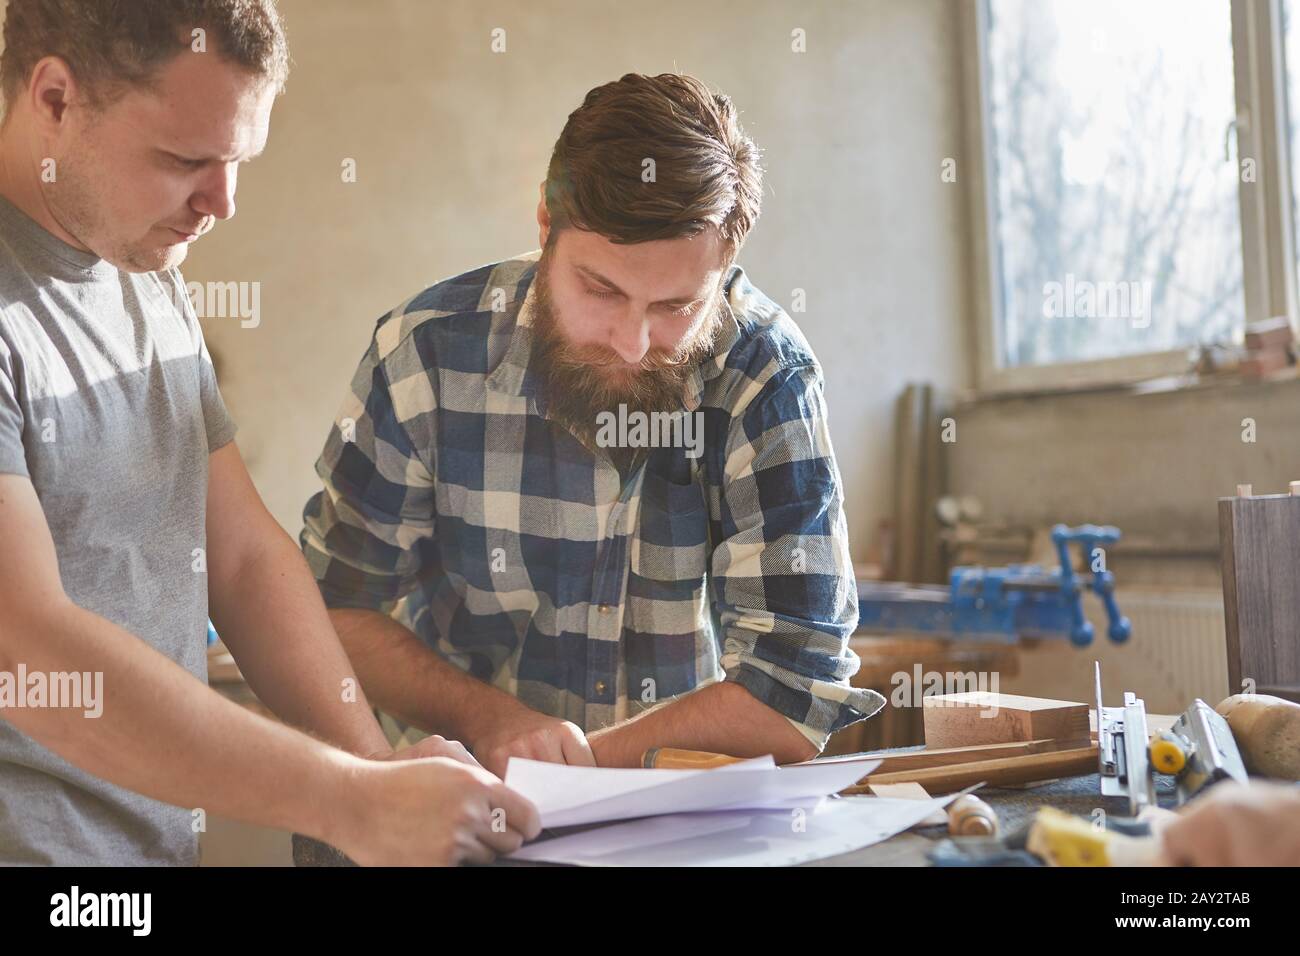 Two carpenters with order on a sheet of paper in the carpentry shop Stock Photo